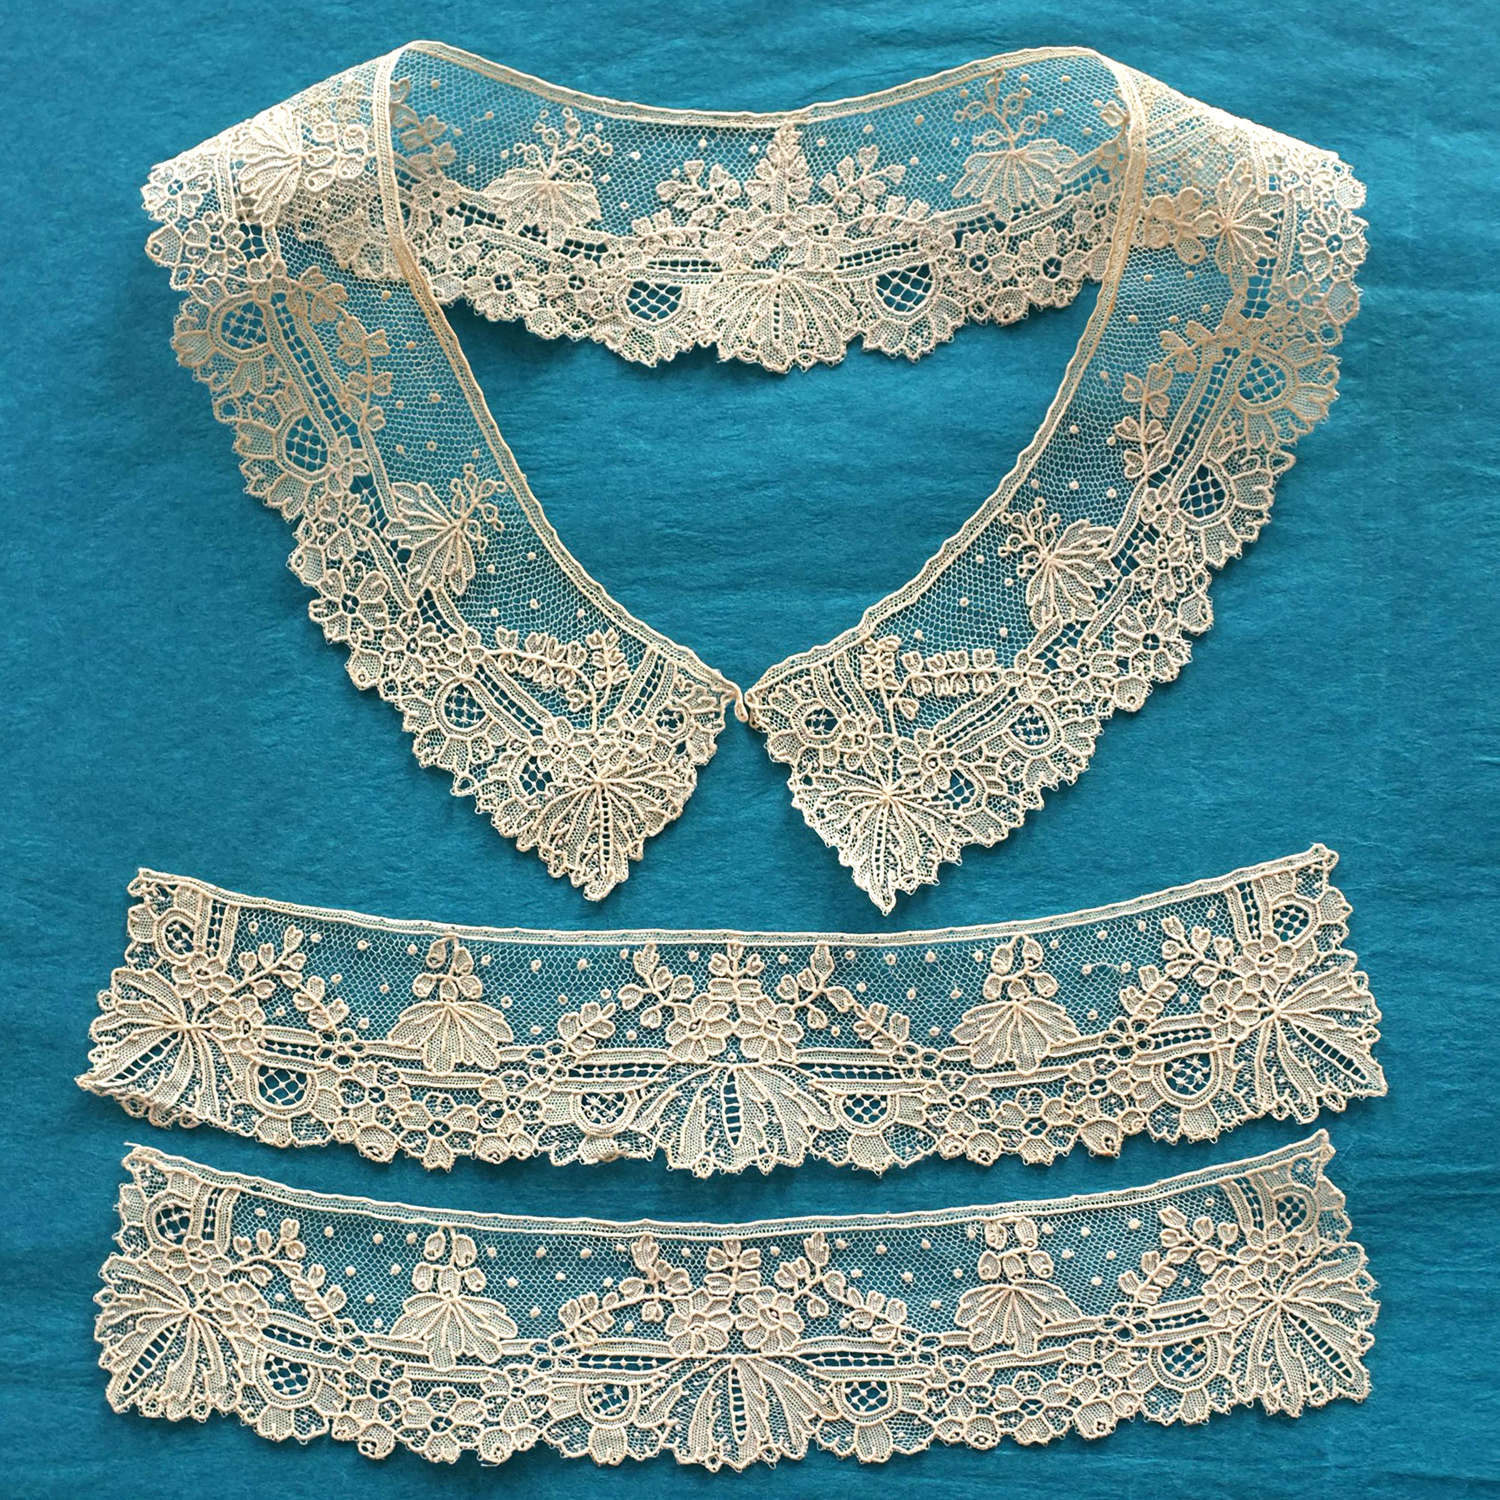 Antique 19th Century Brussels Point de Gaze Lace Collar and Cuffs